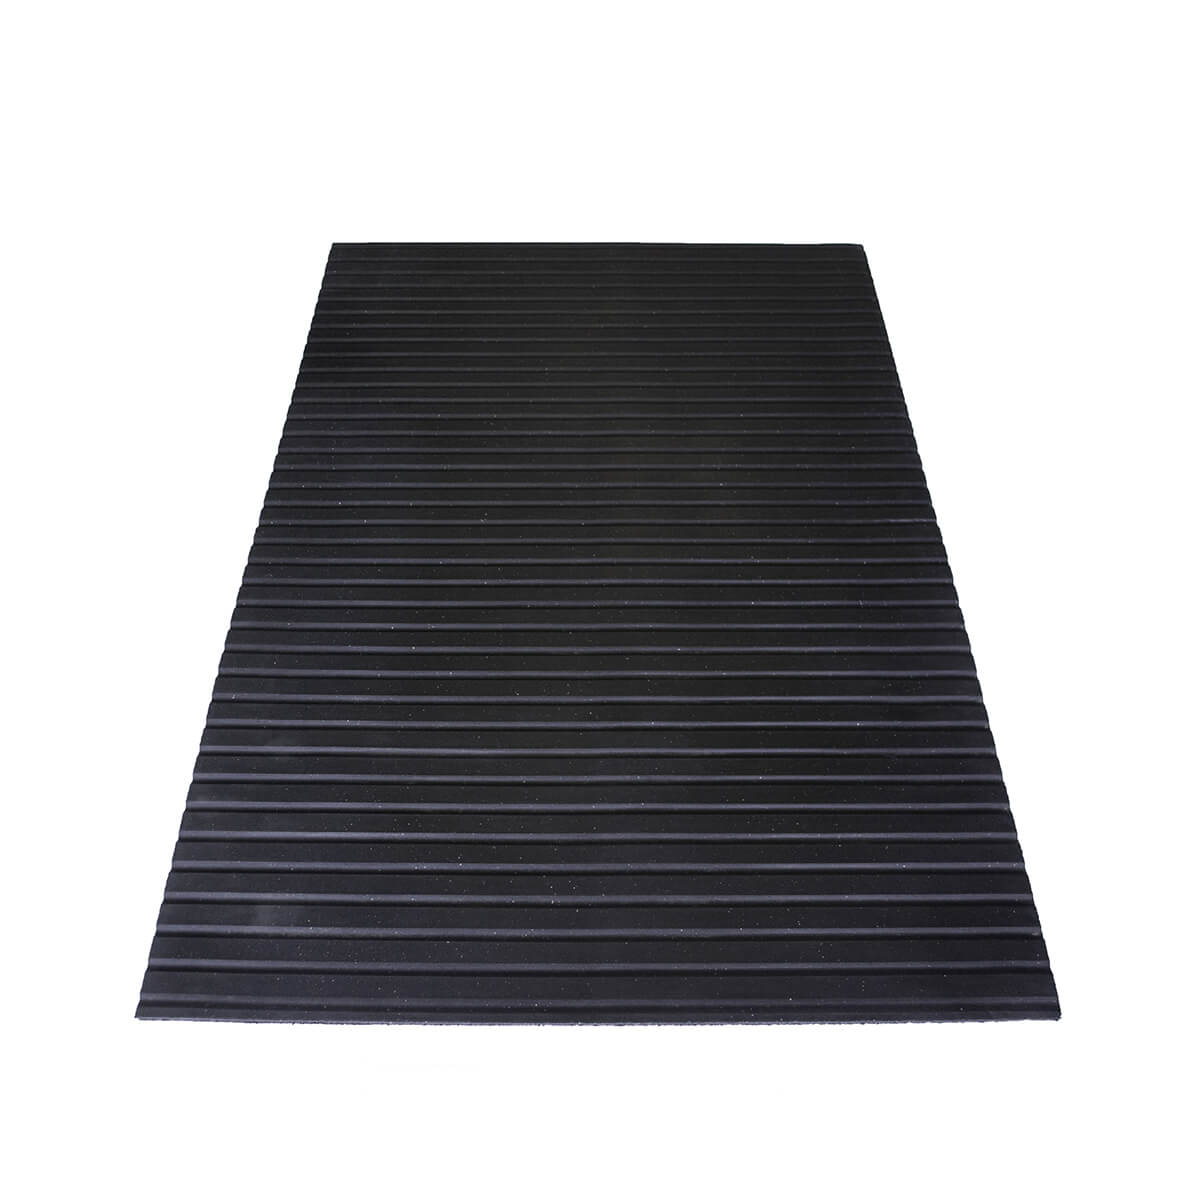 Trailer Mat - Ribbed - 5-ft x 7-ft x 1/2-in